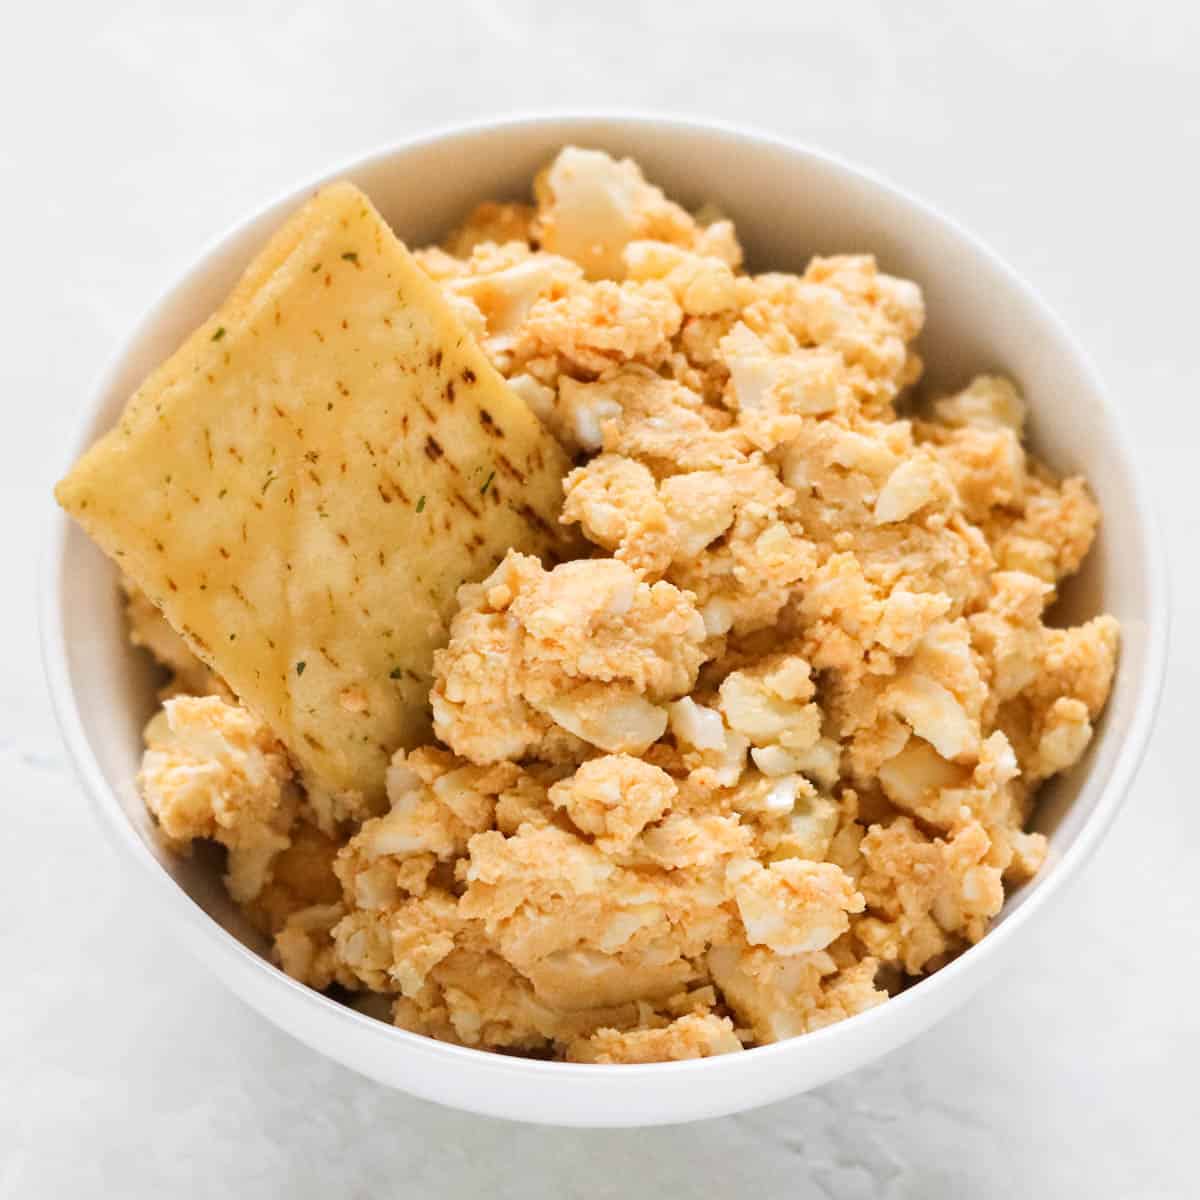 pita chip in a bowl of hummus egg salad using red pepper hummus.